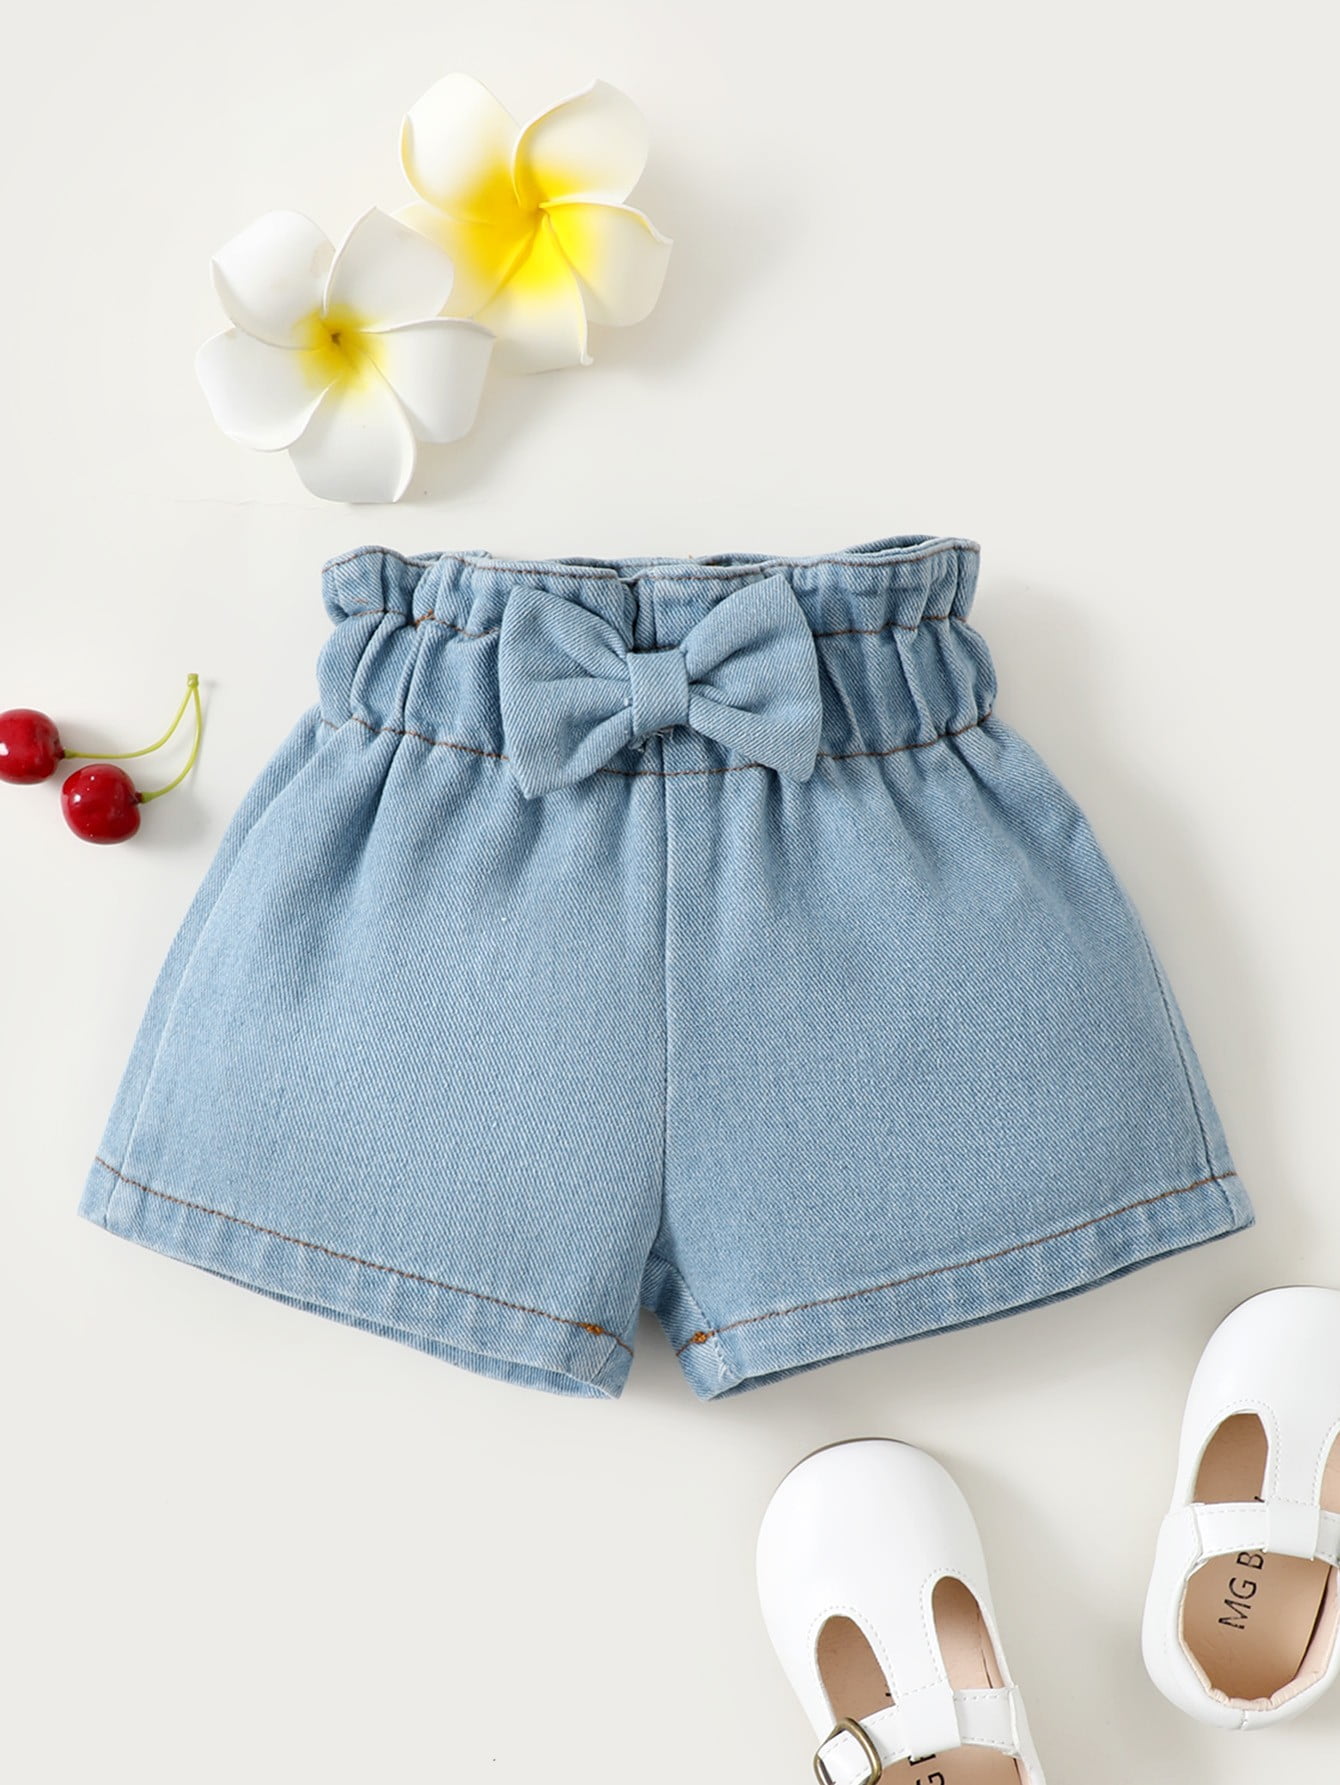 ZCFZJW Toddler Baby Girls Casual Denim Shorts Middle School Students Summer  High Waisted Thin Elastic Waistband Jeans Short Pants #01-Pink 14-15 Years